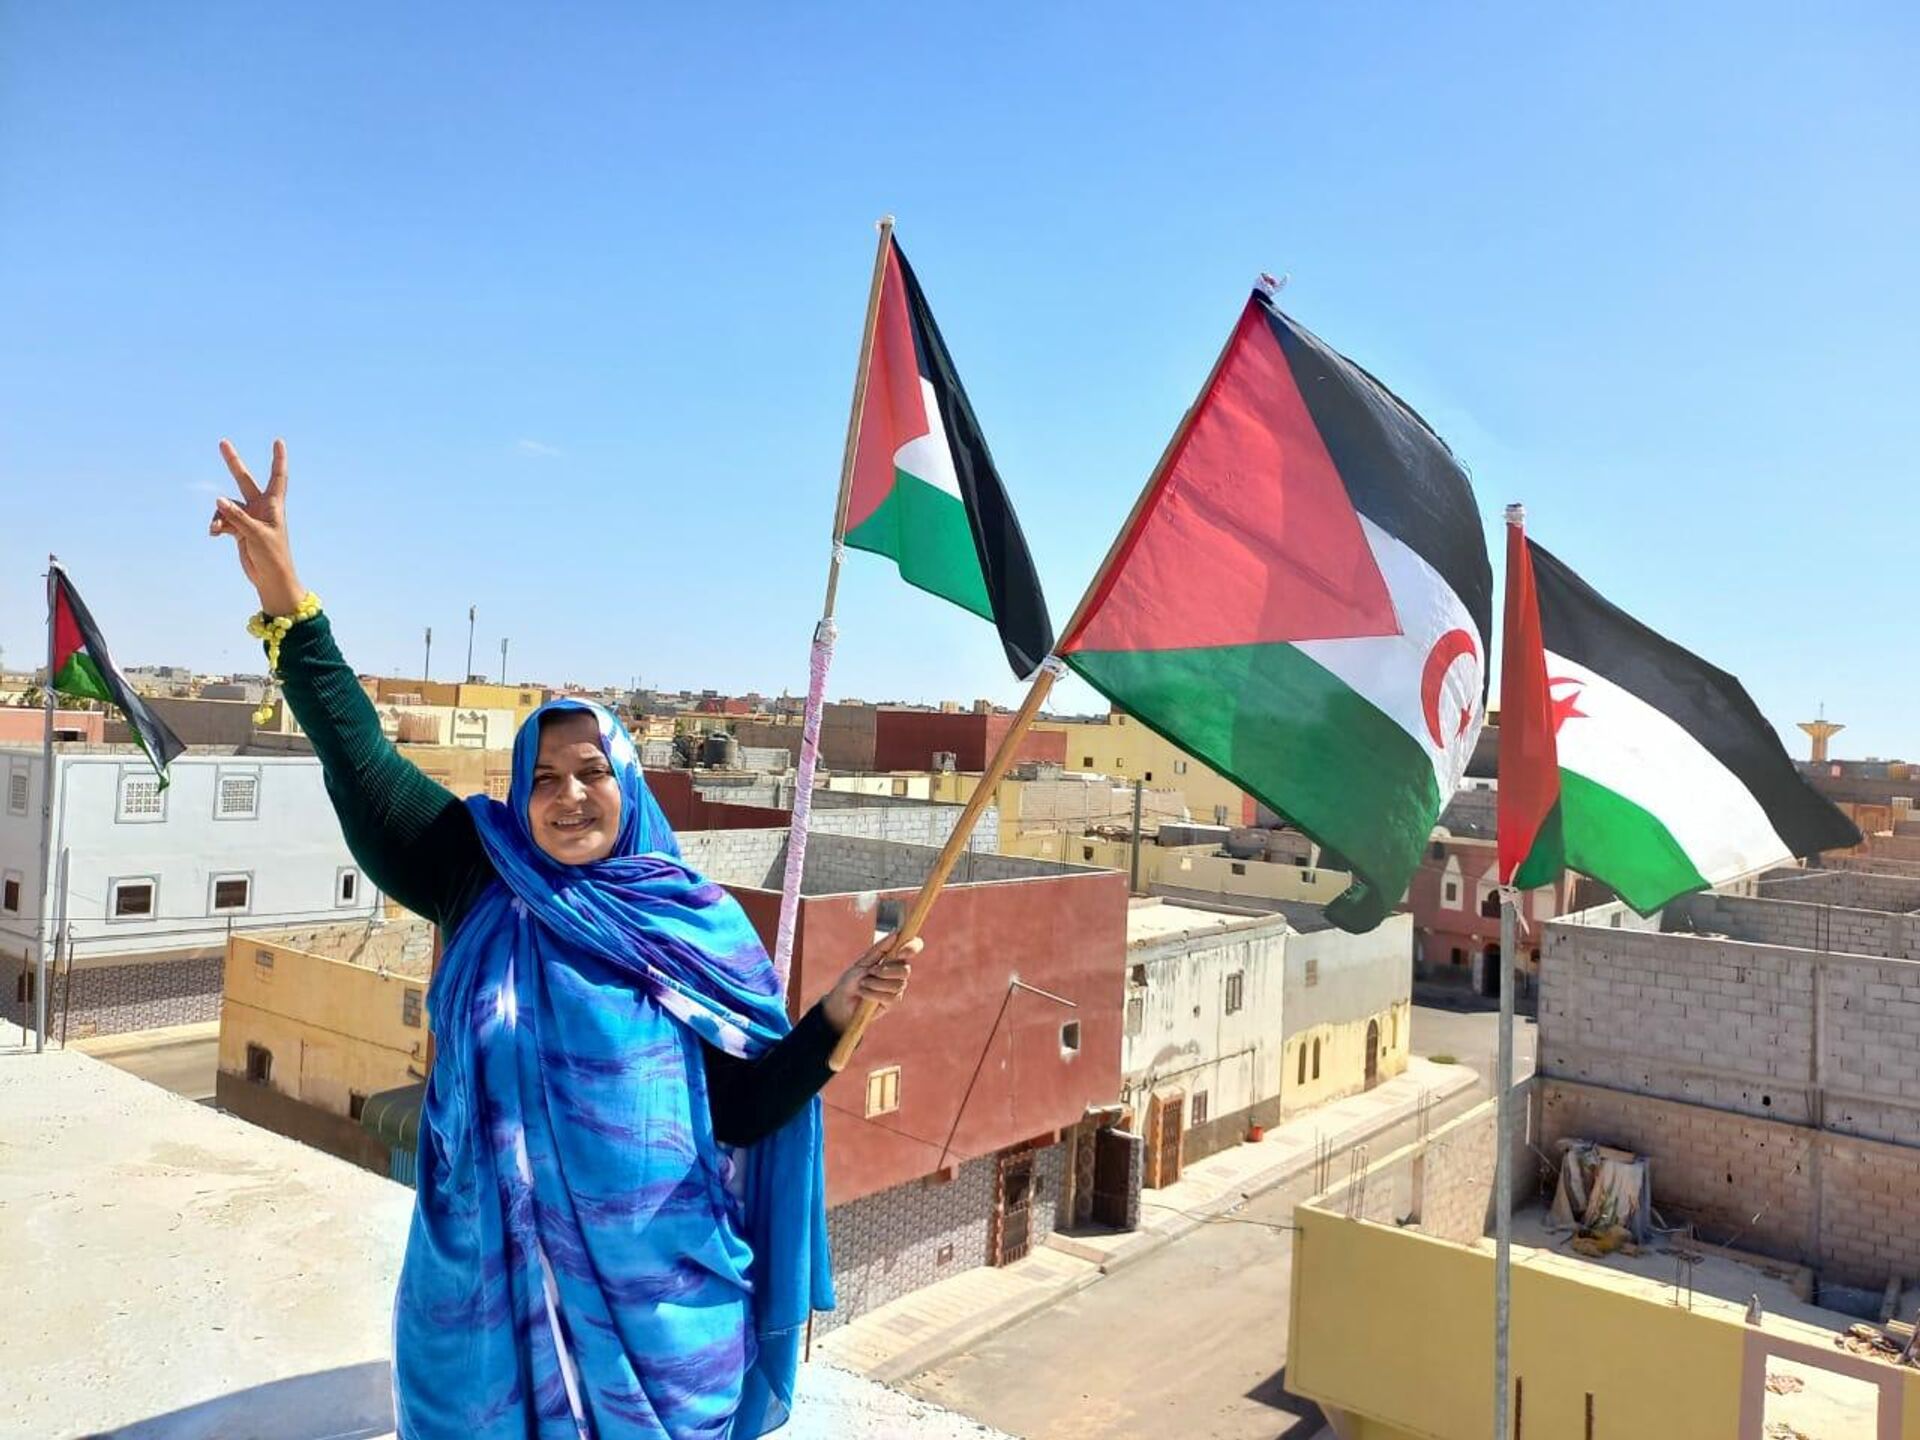 Sultana Khayya, President of the Sahrawi Association for the Defense of Human Rights and the Protection of Natural Resources, on the roof of her home in Boujdour, Western Sahara, where she has been under house arrest since November 2020. - Sputnik International, 1920, 03.08.2022